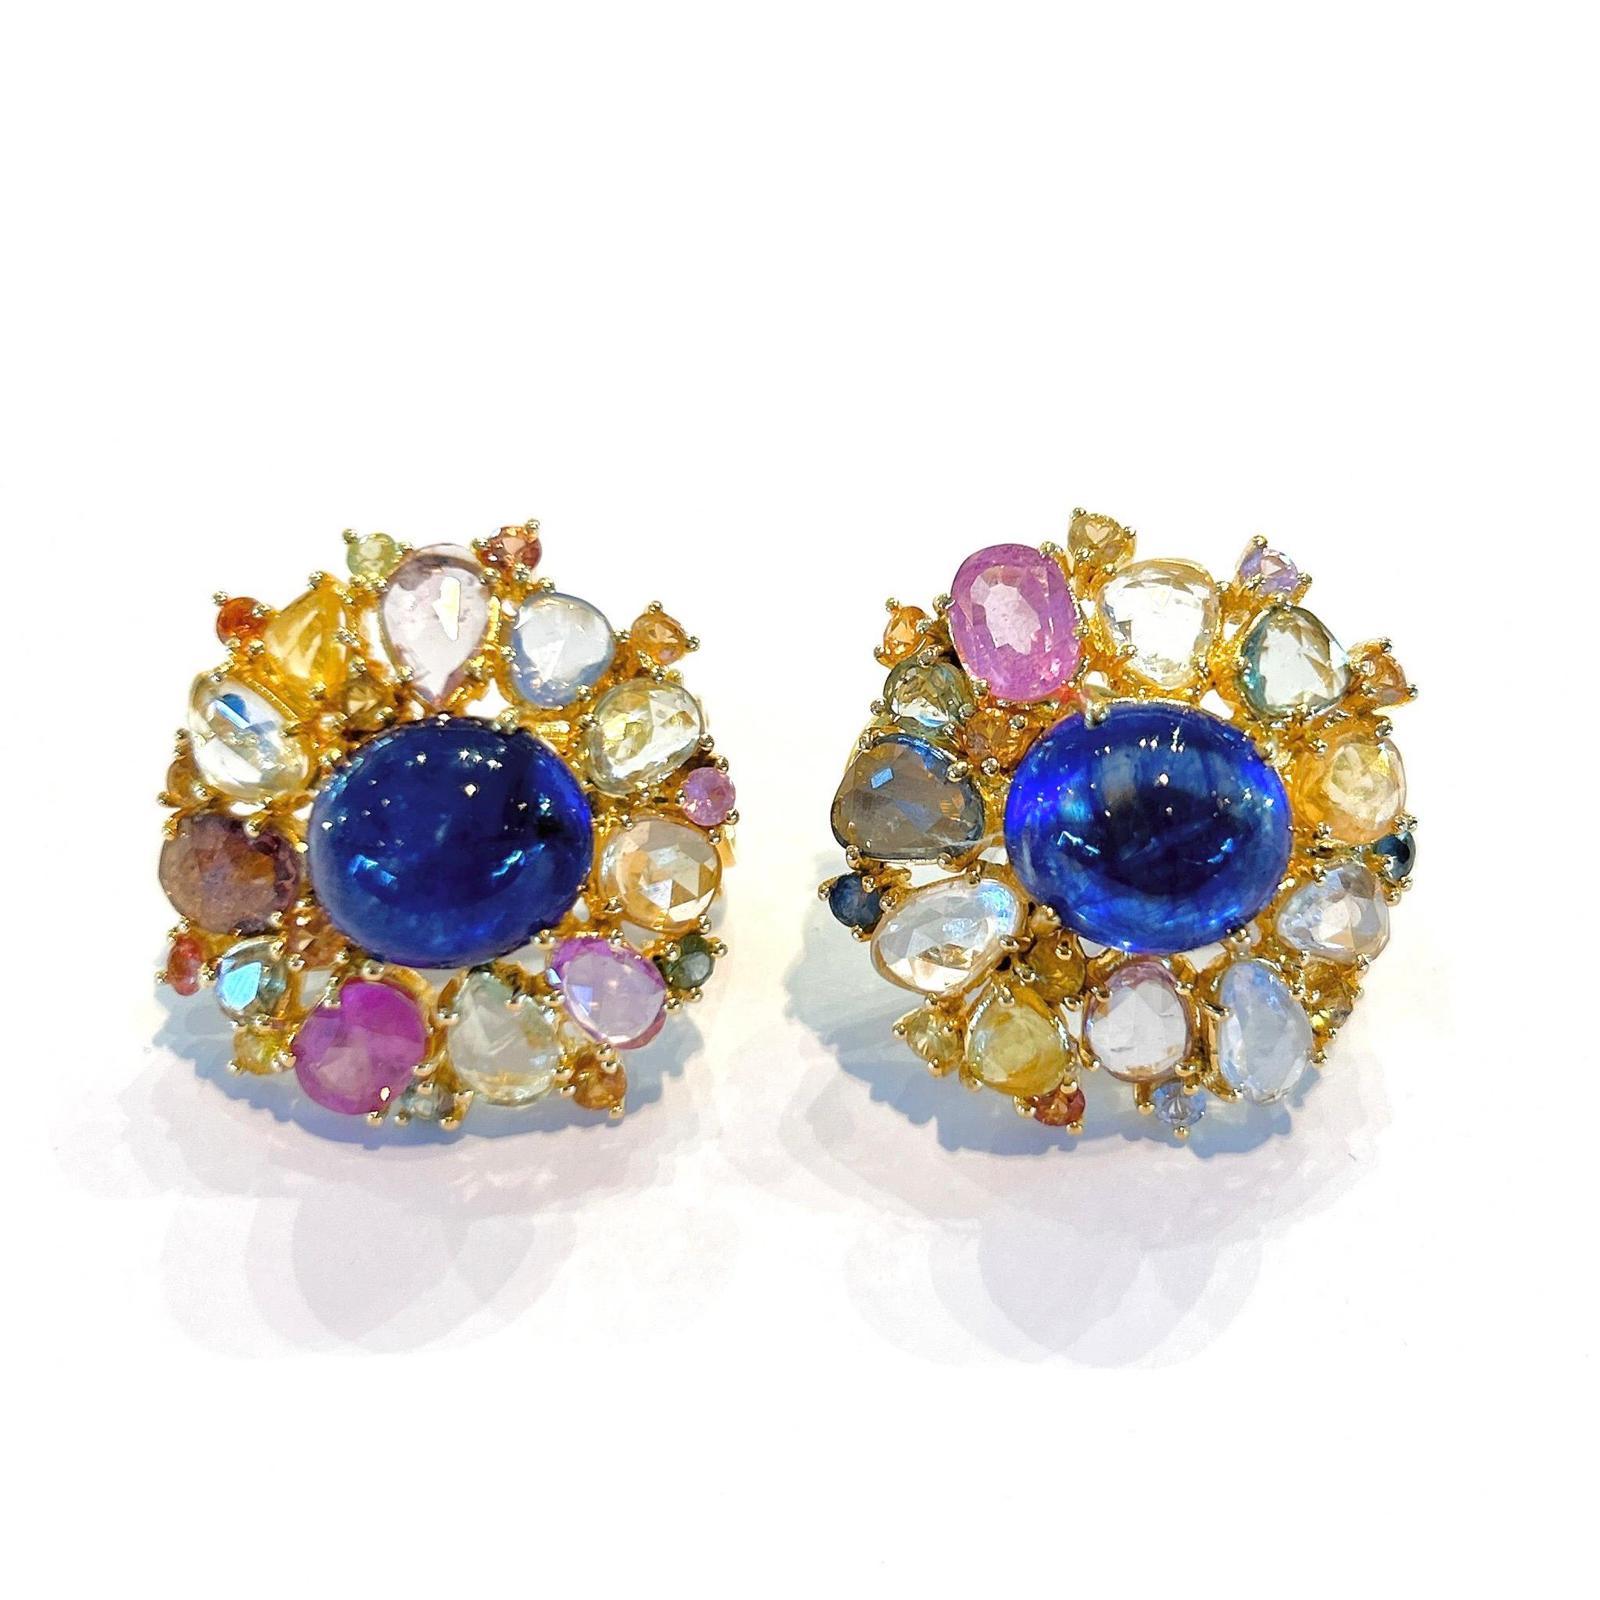 Bochic “Capri” Rose Cut Sapphires & Pearl Earrings Set In 18K Gold & Silver 
Natural Royal Blue Sapphires set in the center, cabochon shape, from Sri Lanka - 21 Carats 
Natural Multi Color Rose Cut Sapphires and Rubis from Sri Lanka 
15 Carats 

The